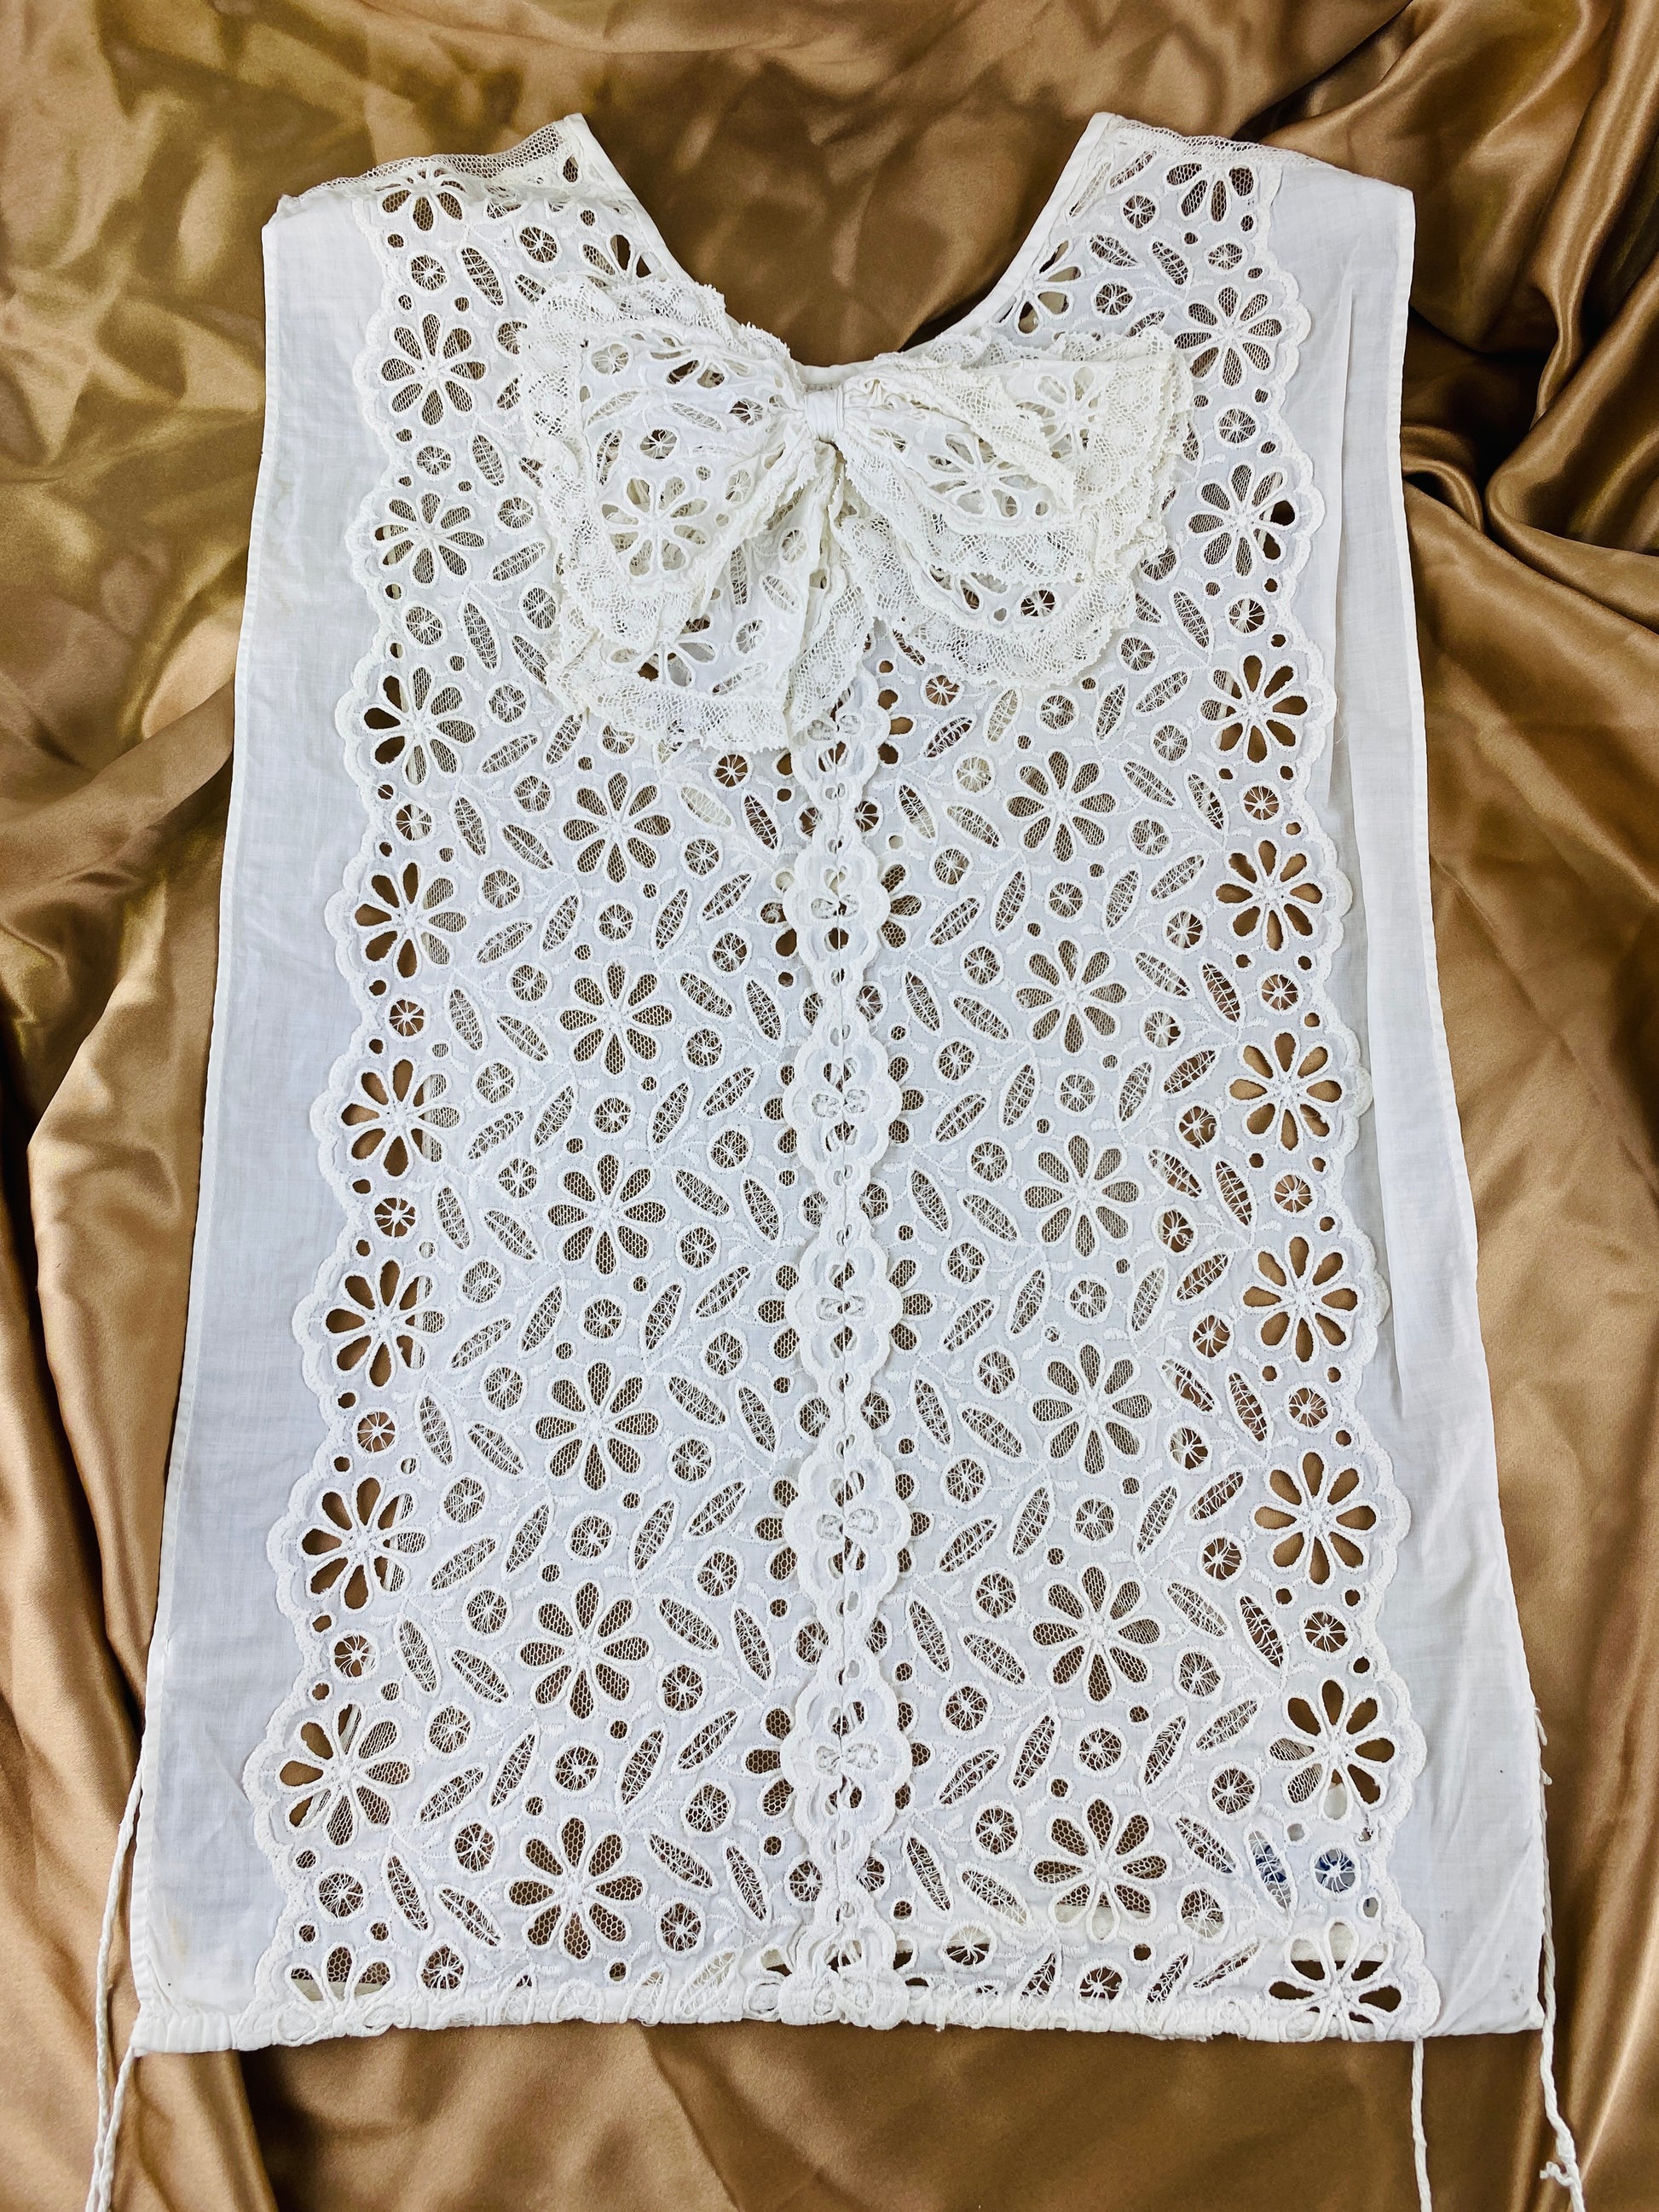 Vintage 1930s White Cotton Cutwork Embroidery Bib Vest With Bow